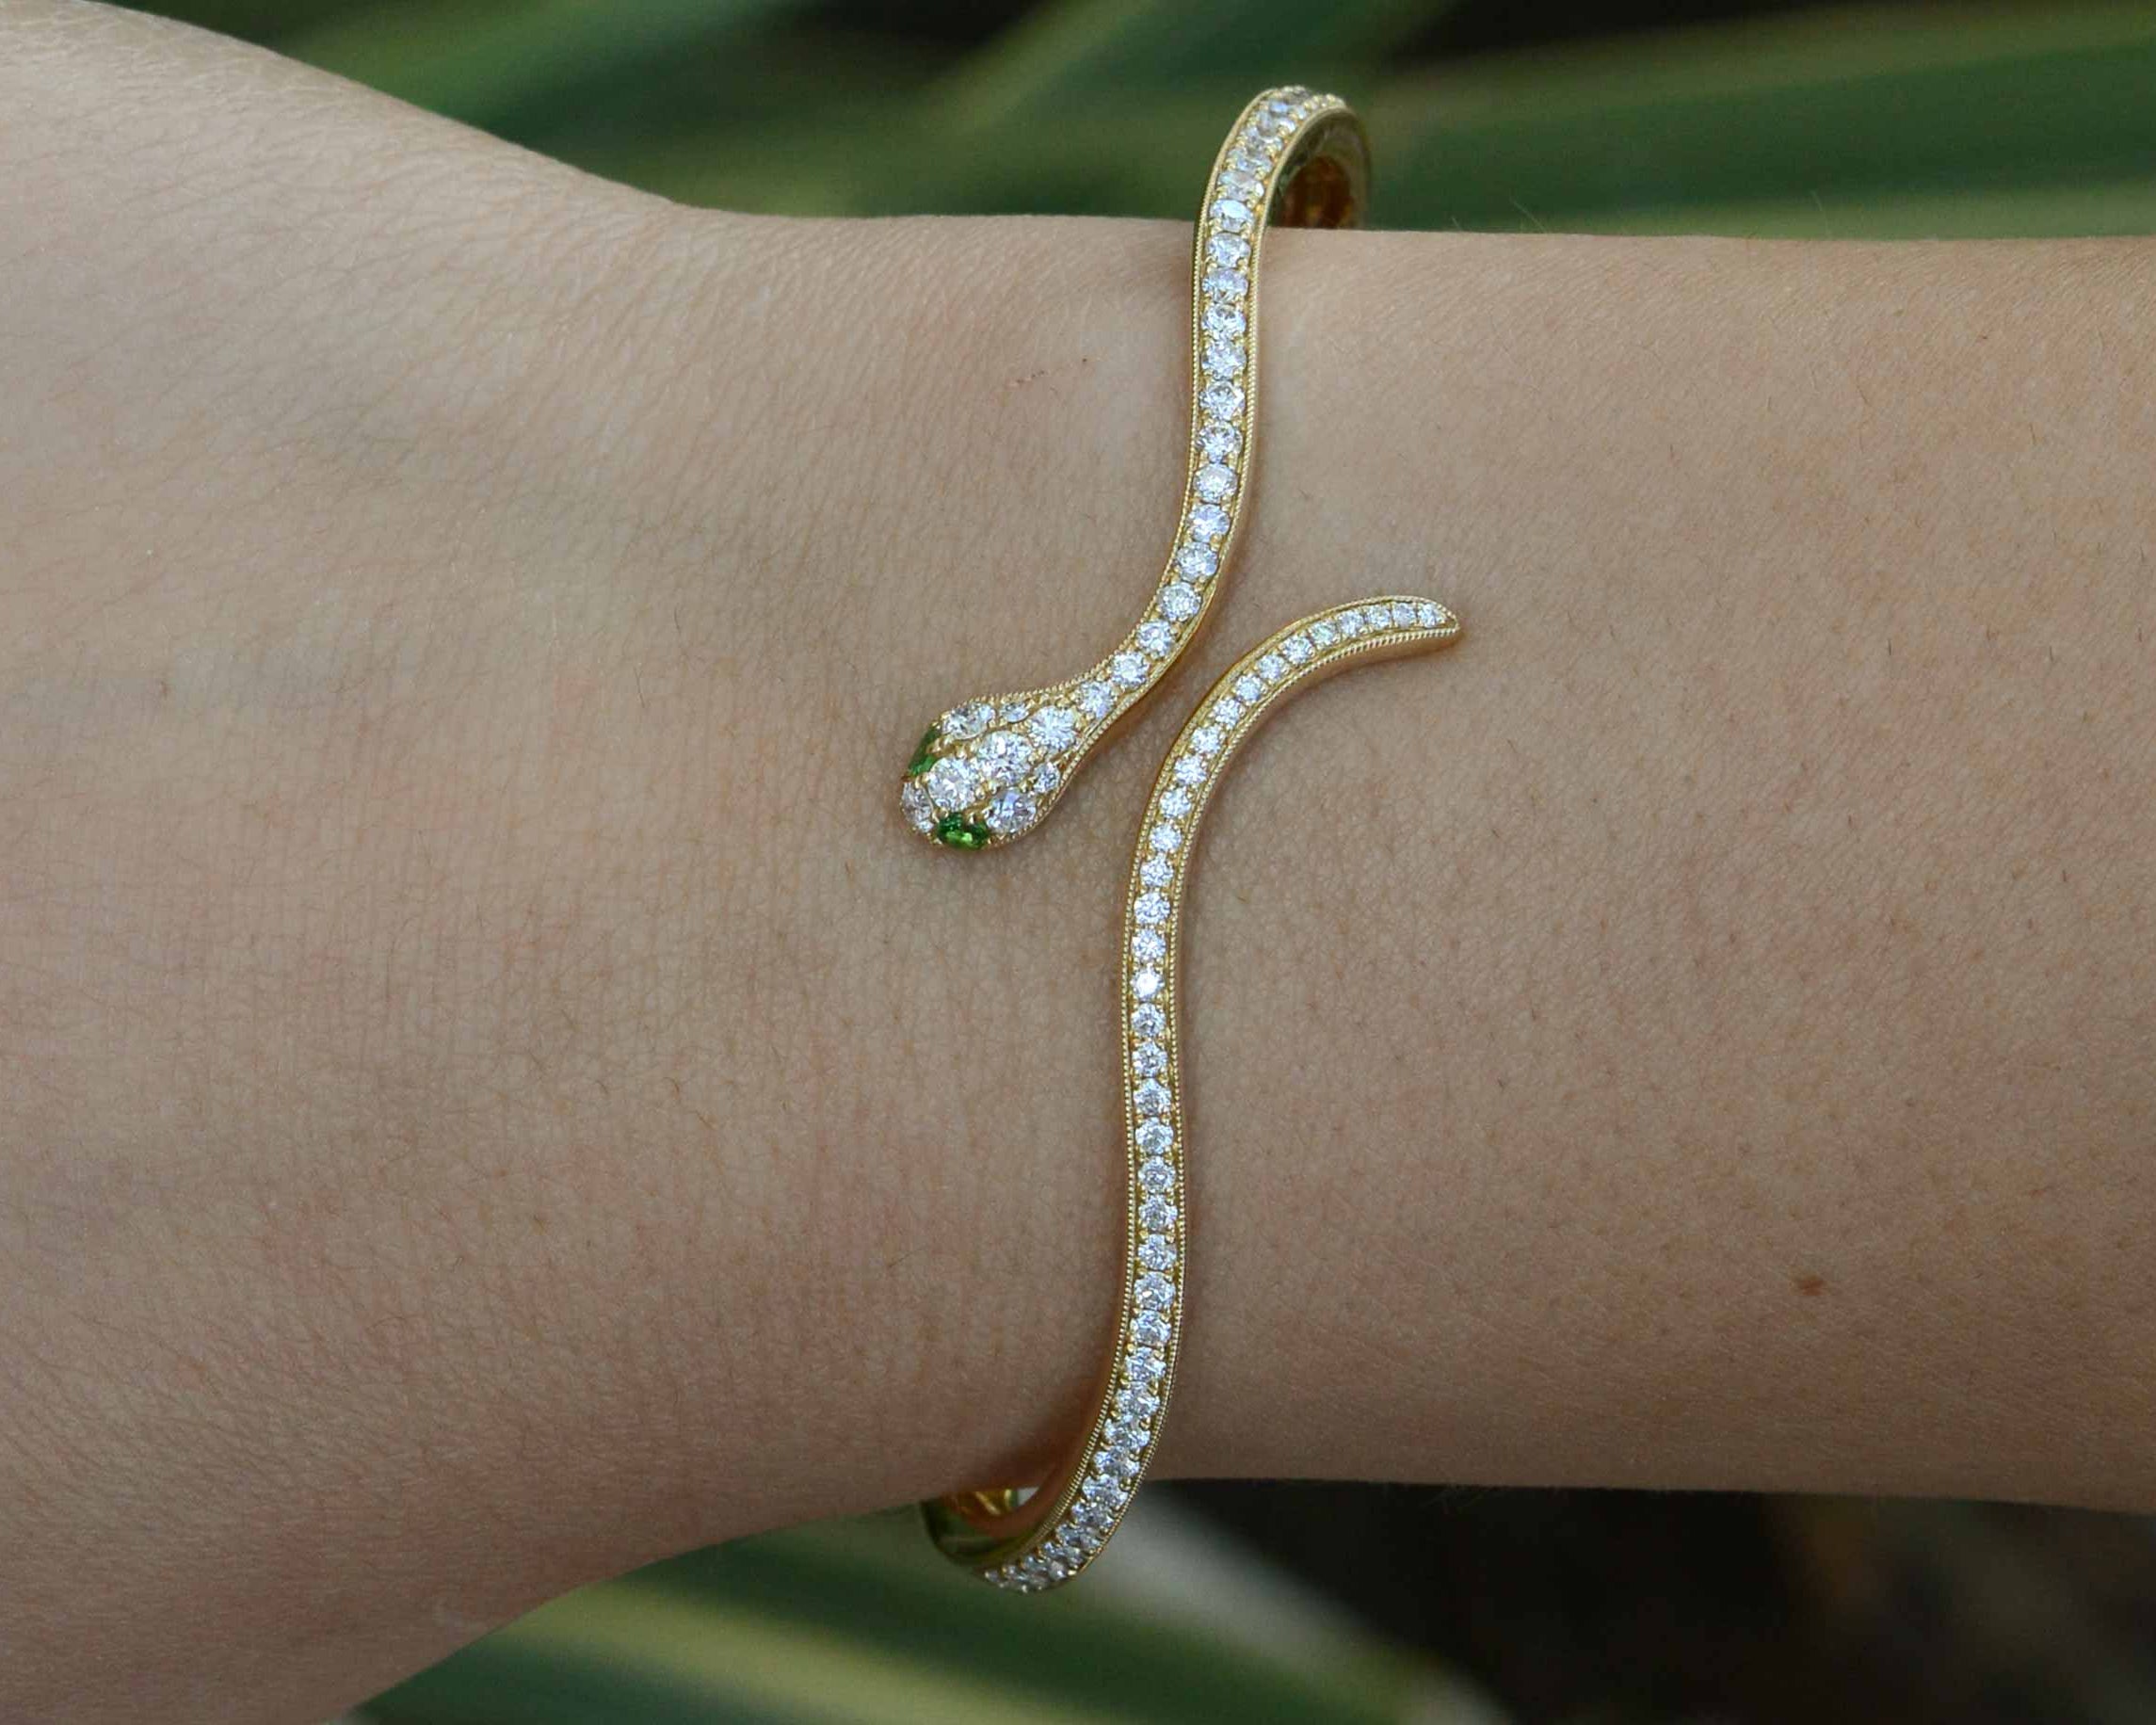 Nearly 1 and a half carats of round diamonds line this thin modern snake bracelet.